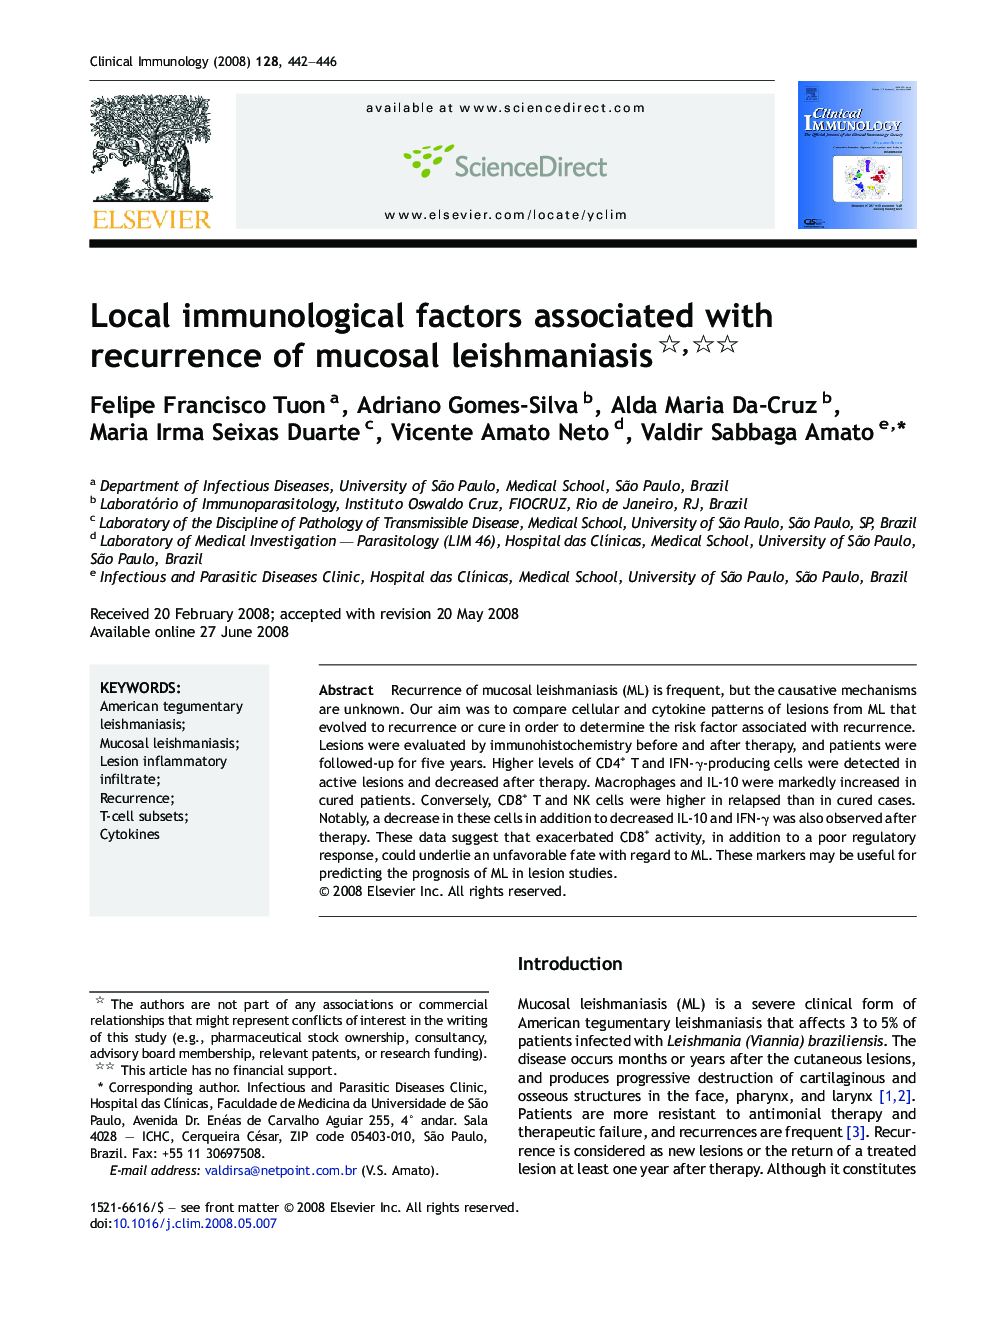 Local immunological factors associated with recurrence of mucosal leishmaniasis 